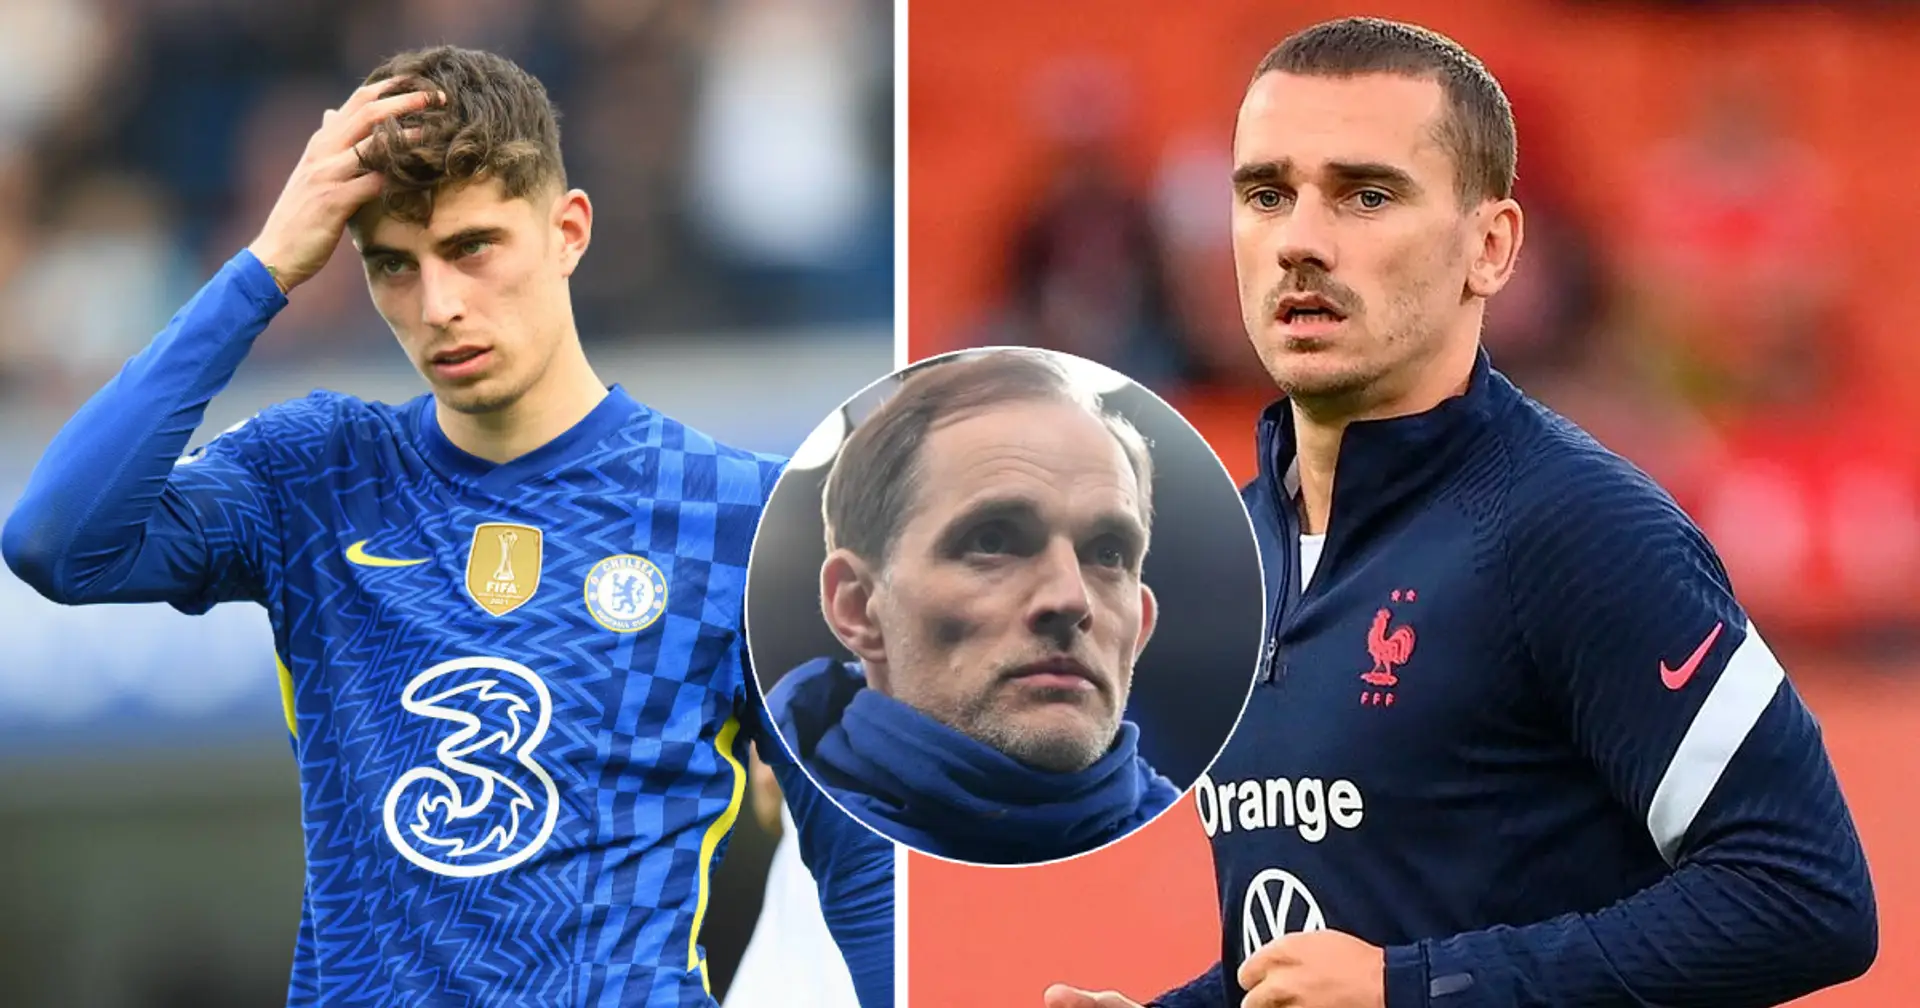 'Can't lead the attack': Fan uses Griezmann, Muller example to show how Havertz isn't suited for Chelsea's system